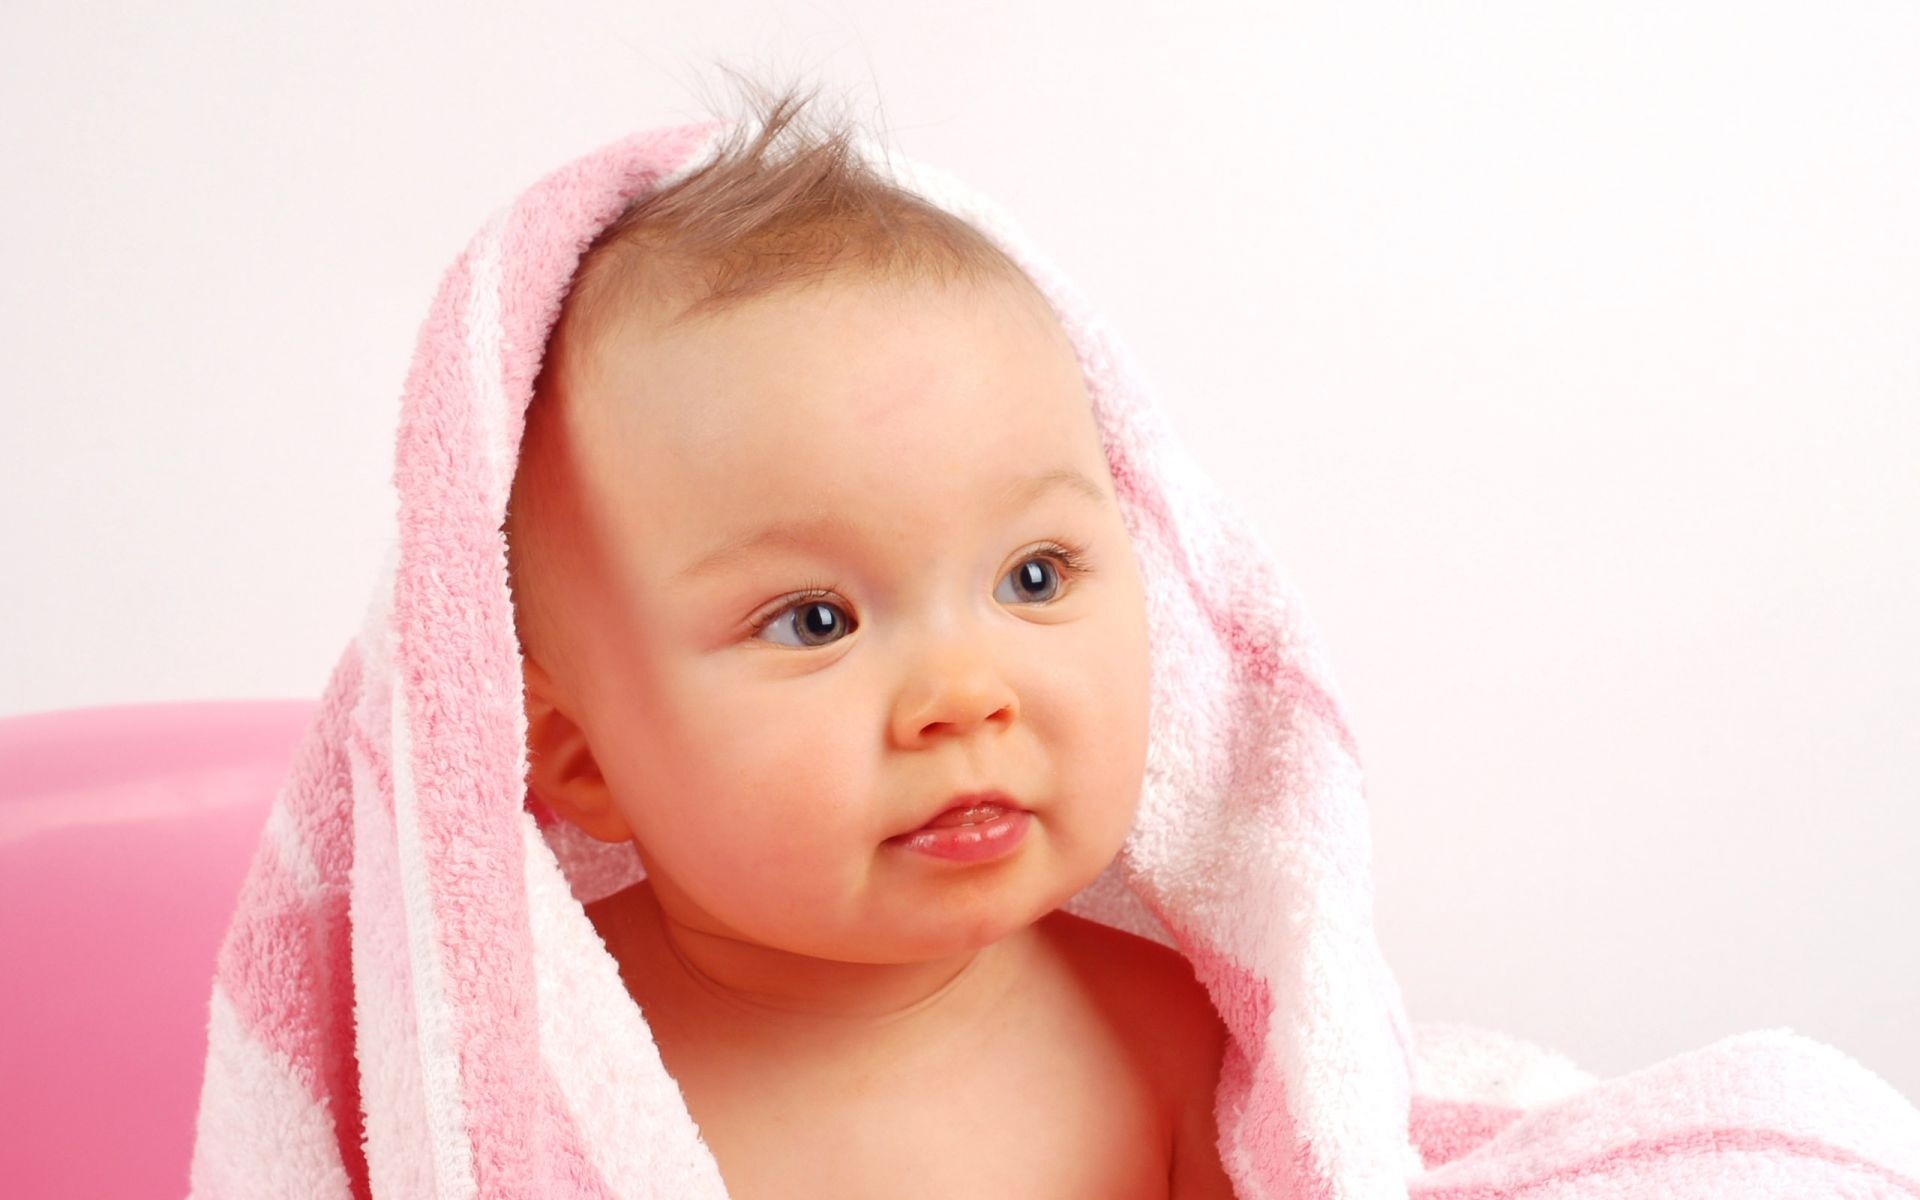 Small And Cute Baby Wallpaper Download - Baby In Pink Towel , HD Wallpaper & Backgrounds